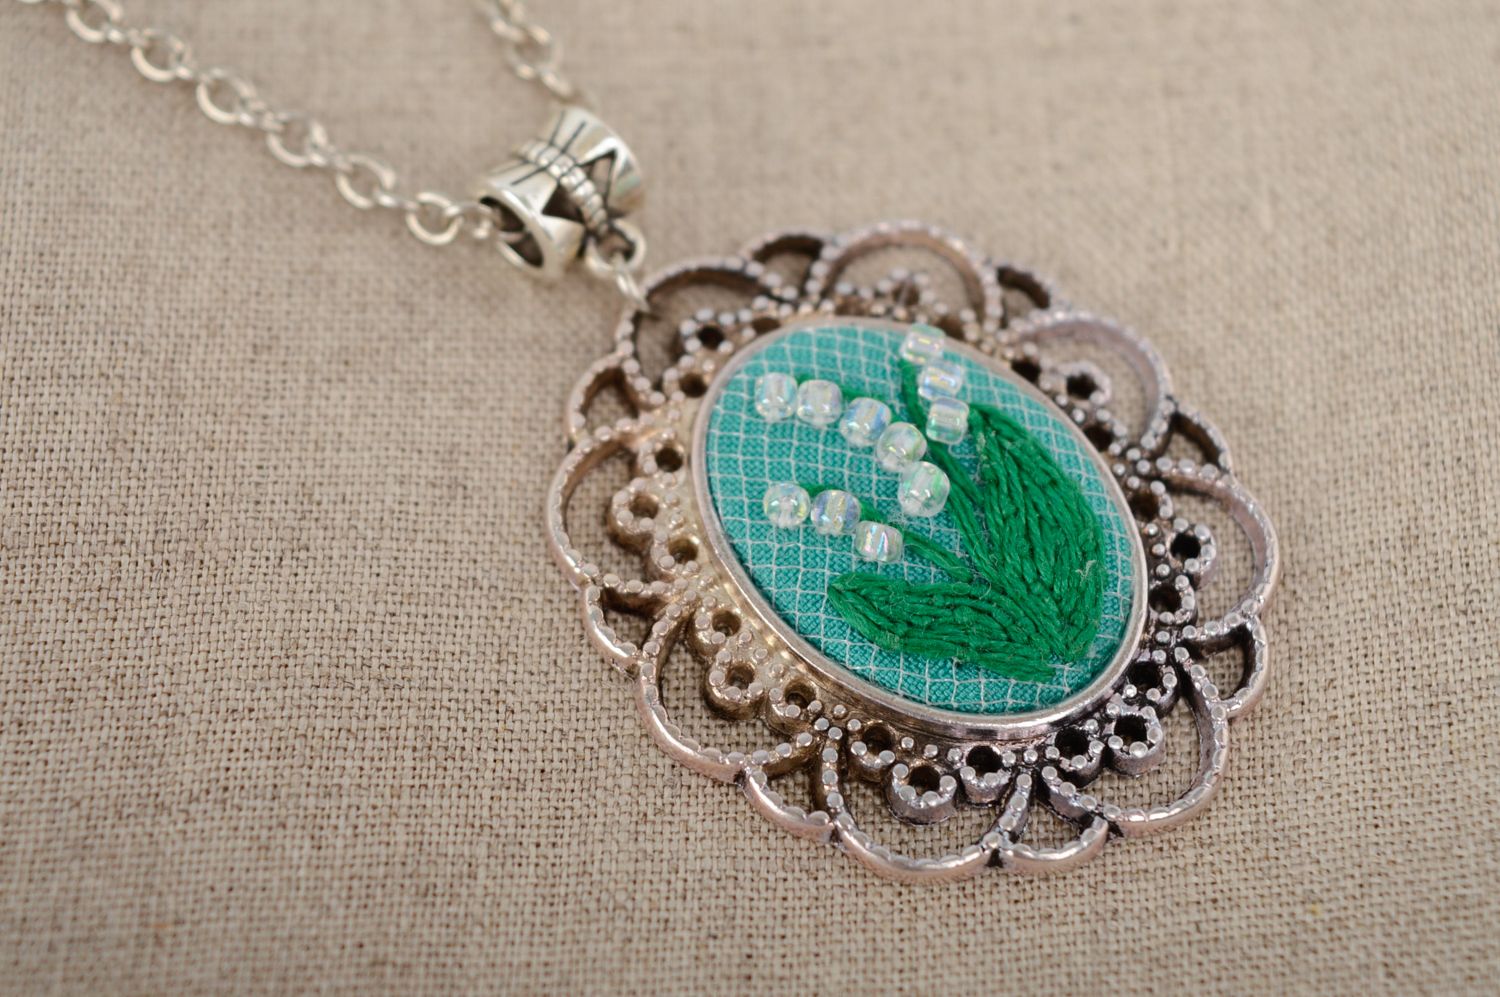 Vintage pendant embroidered with beads in rococo style photo 4